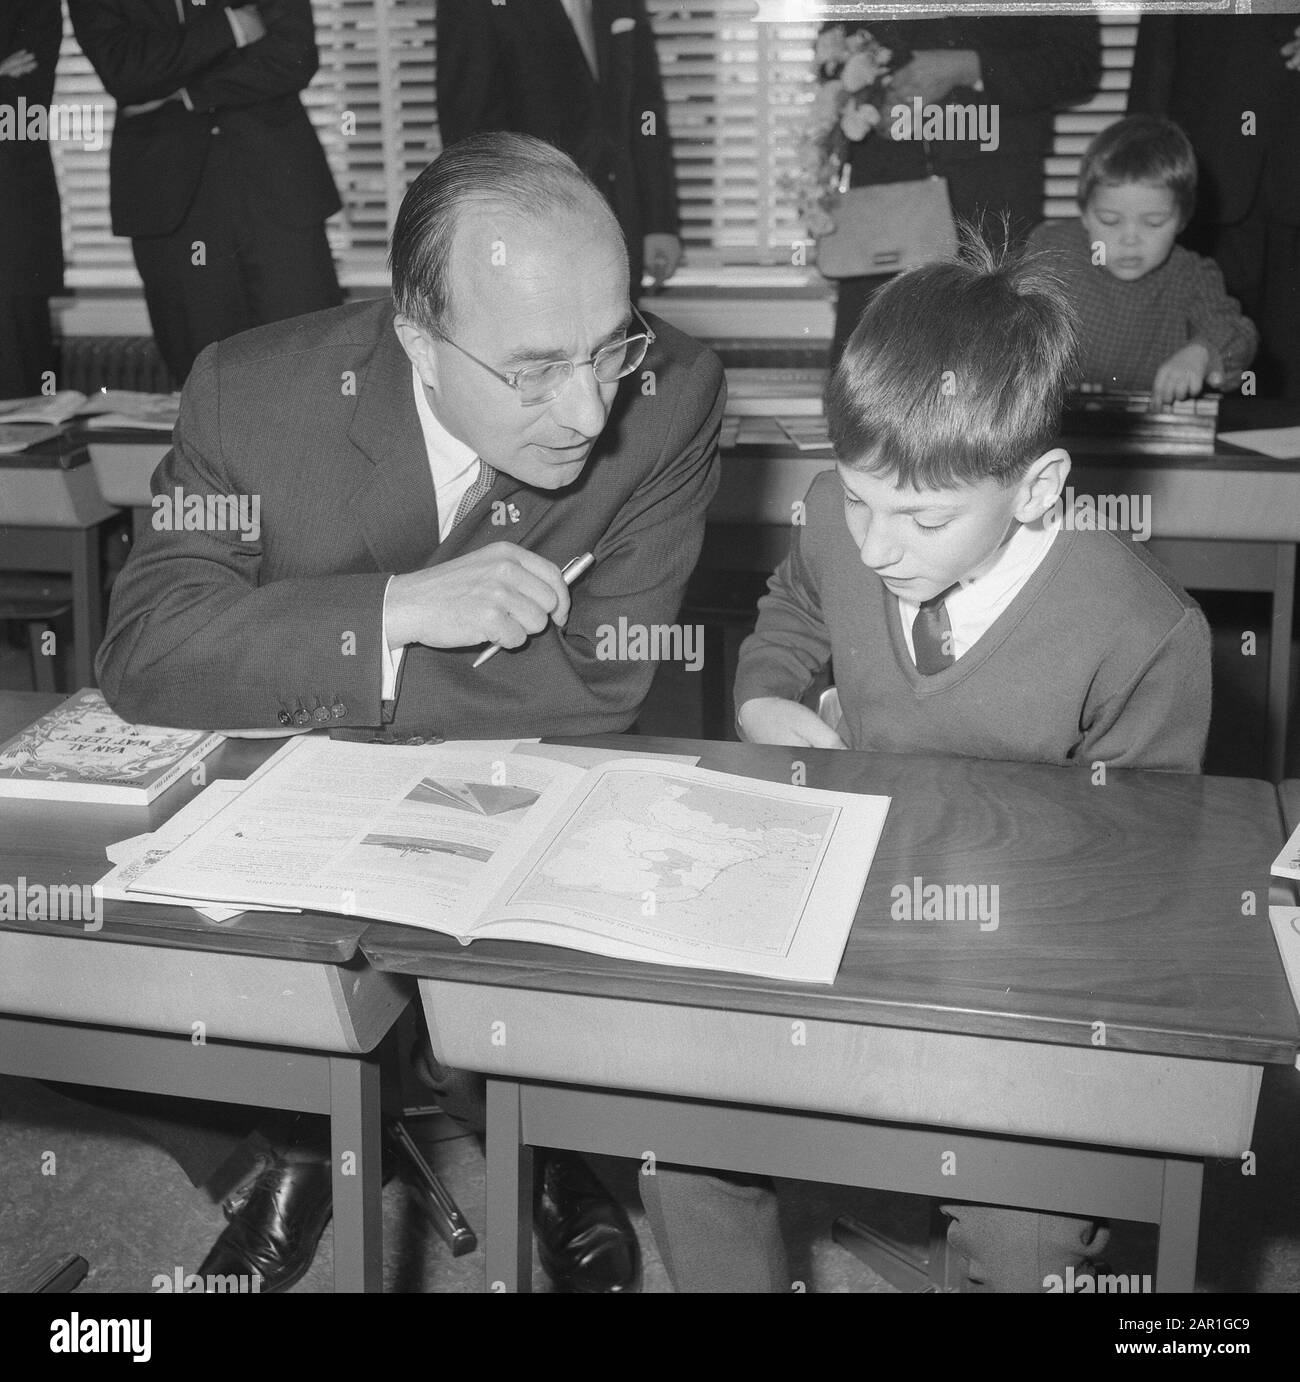 Minister-President Cals during the opening of the Mr. Calsschool in Rotterdam  Minister- President Cals sitting behind a desk, next to a student Date: 27 October 1965 Location: Rotterdam, South Holland Keywords: pupils, ministers-presidents, openings, schools Personal name: Cals, Jo Stock Photo